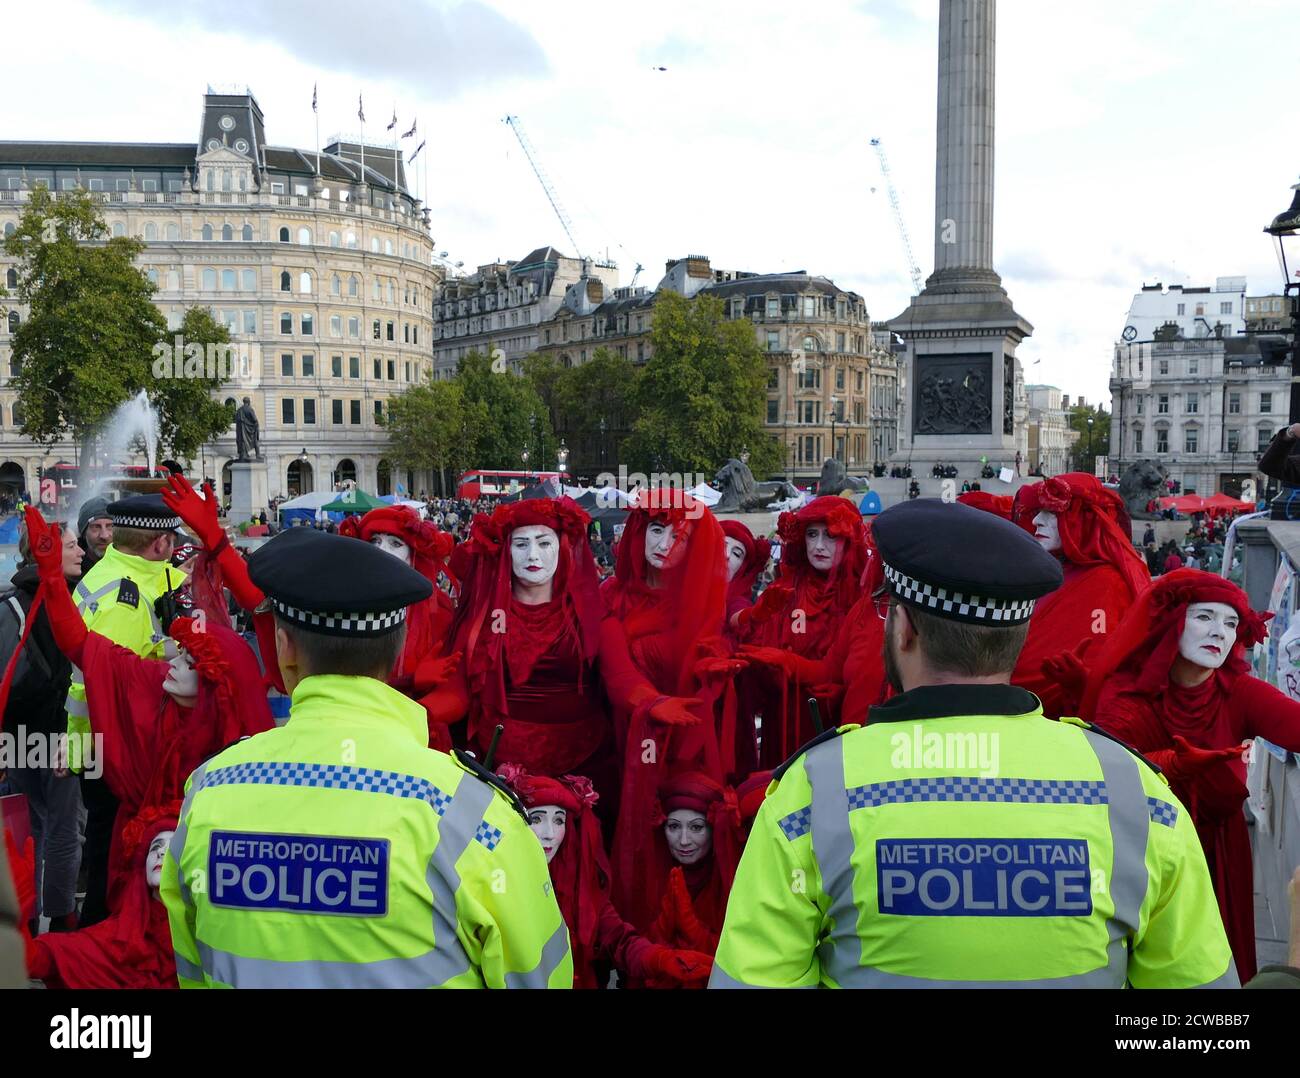 The Invisible Circus at the Extinction Rebellion protest 13th October 2019, at Trafalgar Square in central London . The Invisible Circus group from Bristol is made up of street performers dressed in red robes symbolizing the blood that binds humanity together. Stock Photo